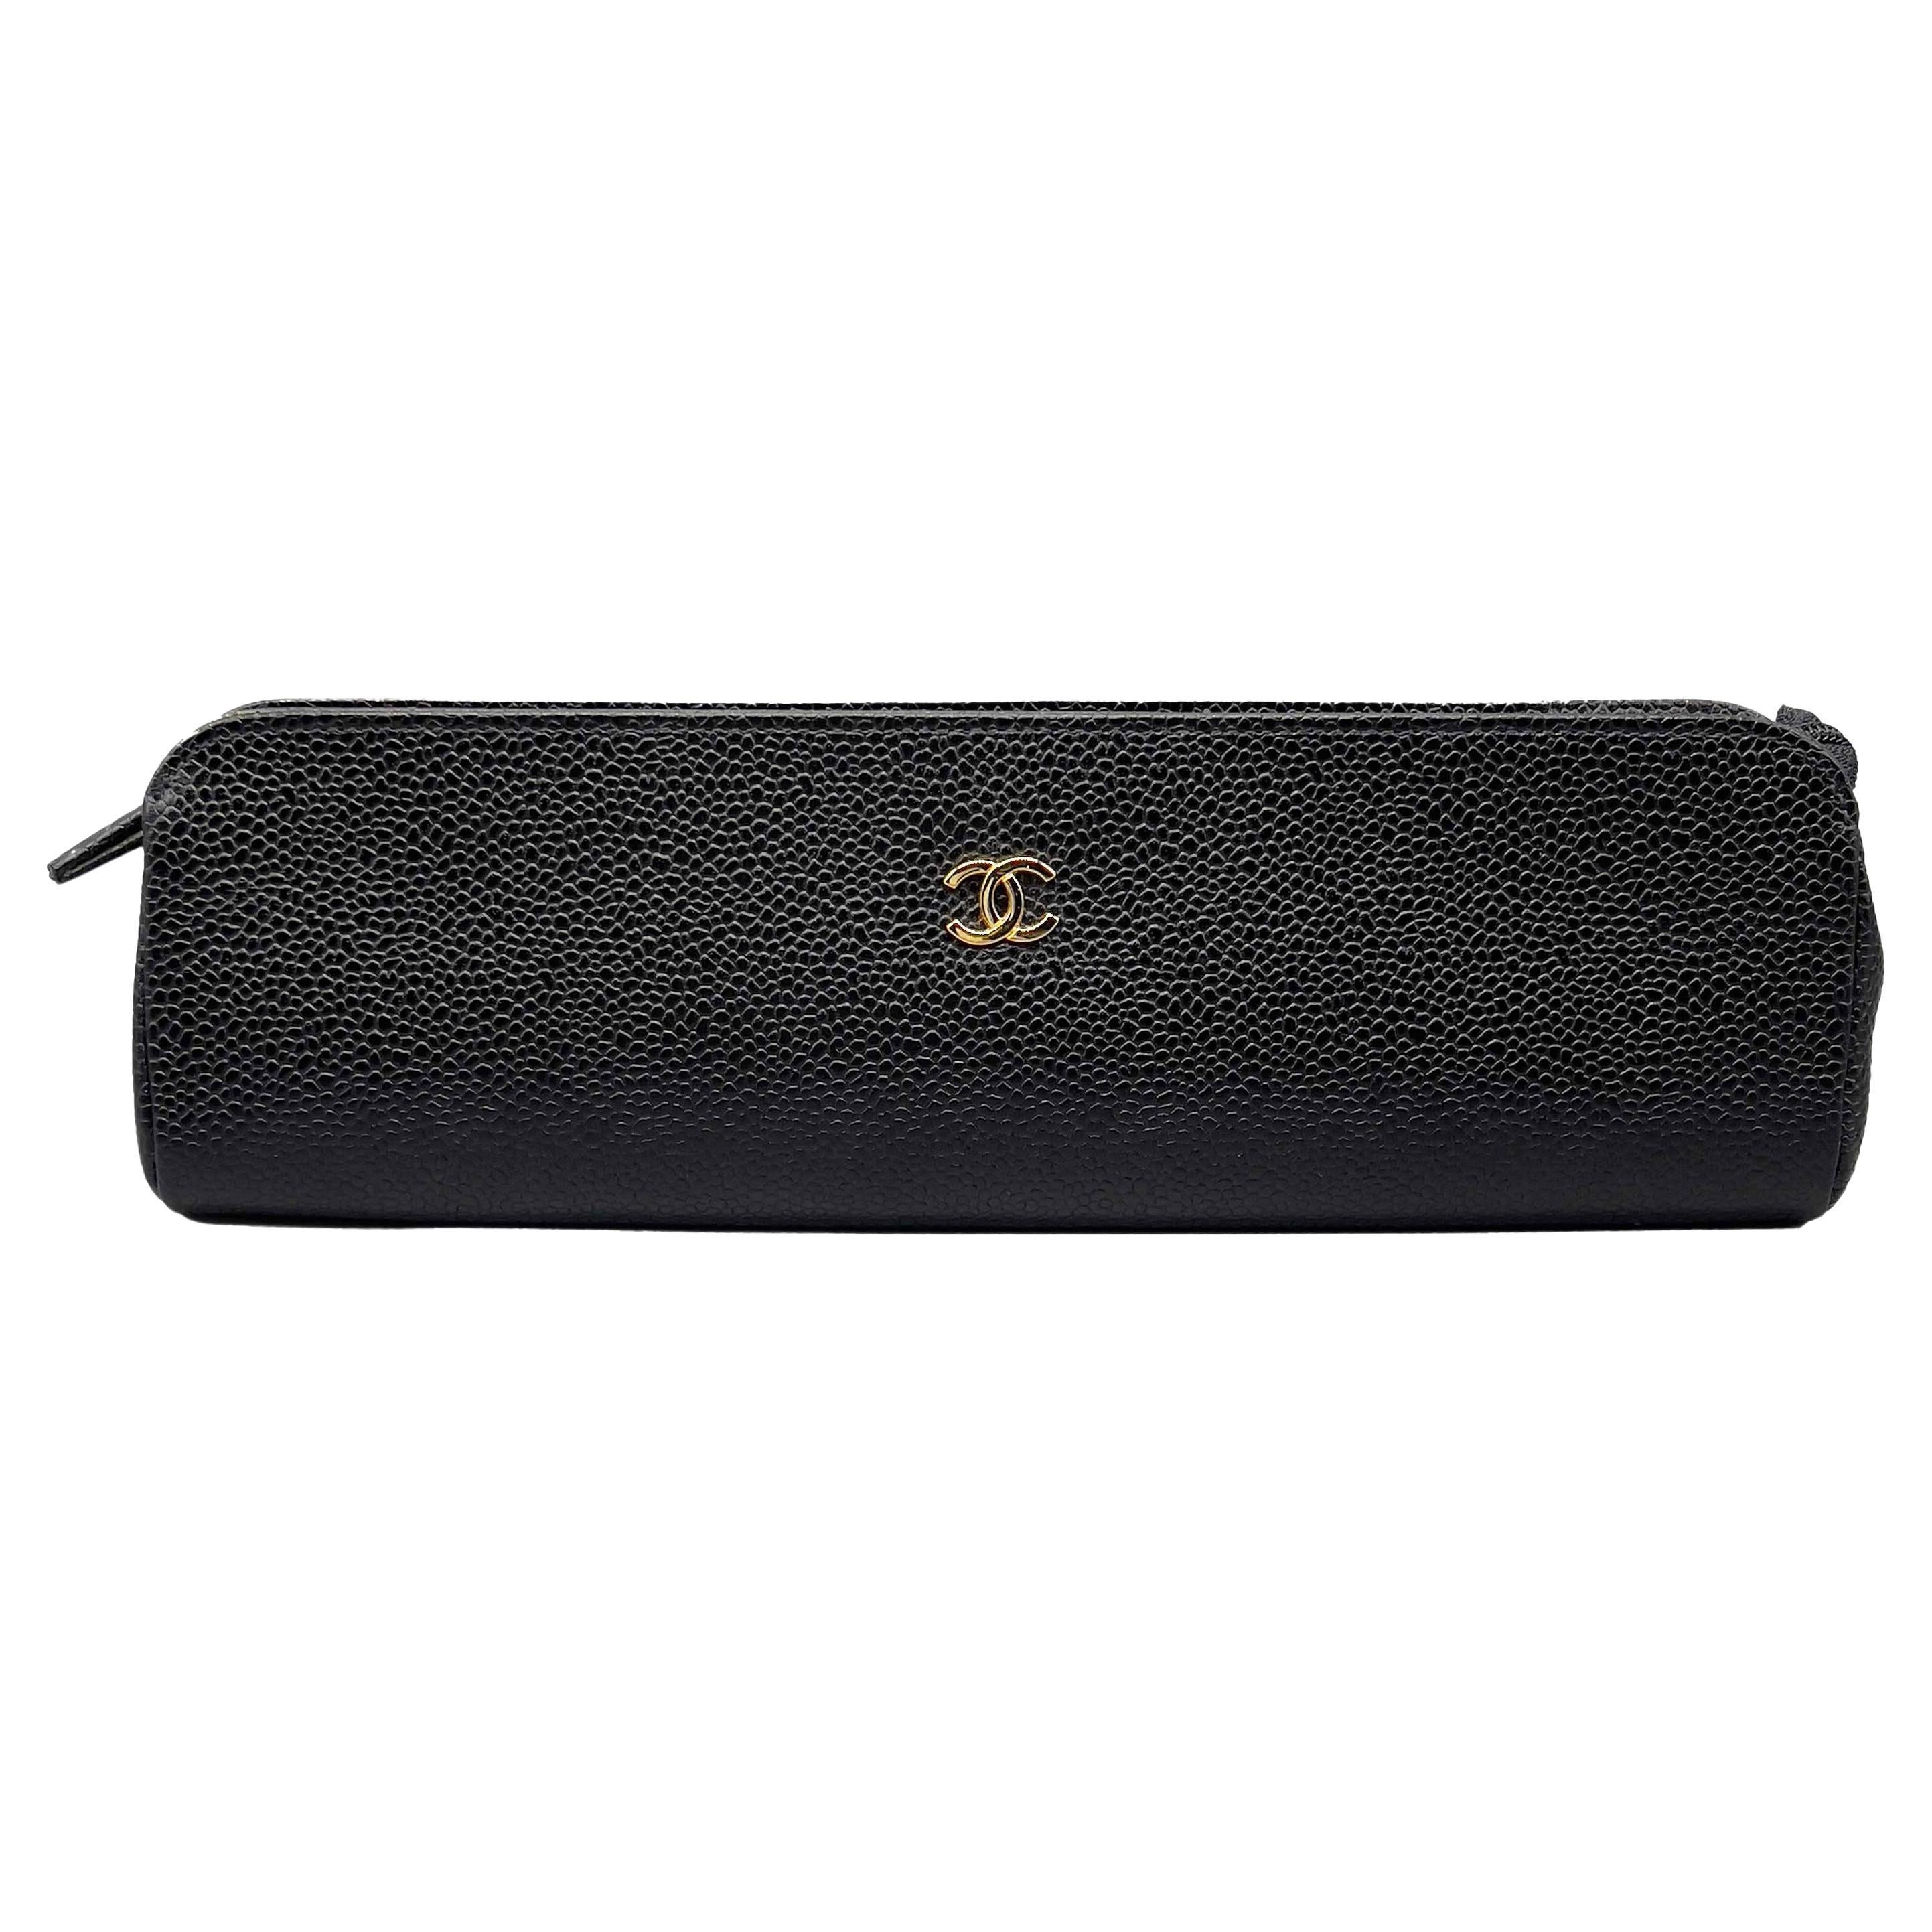 Chanel Pencil Case - 9 For Sale on 1stDibs